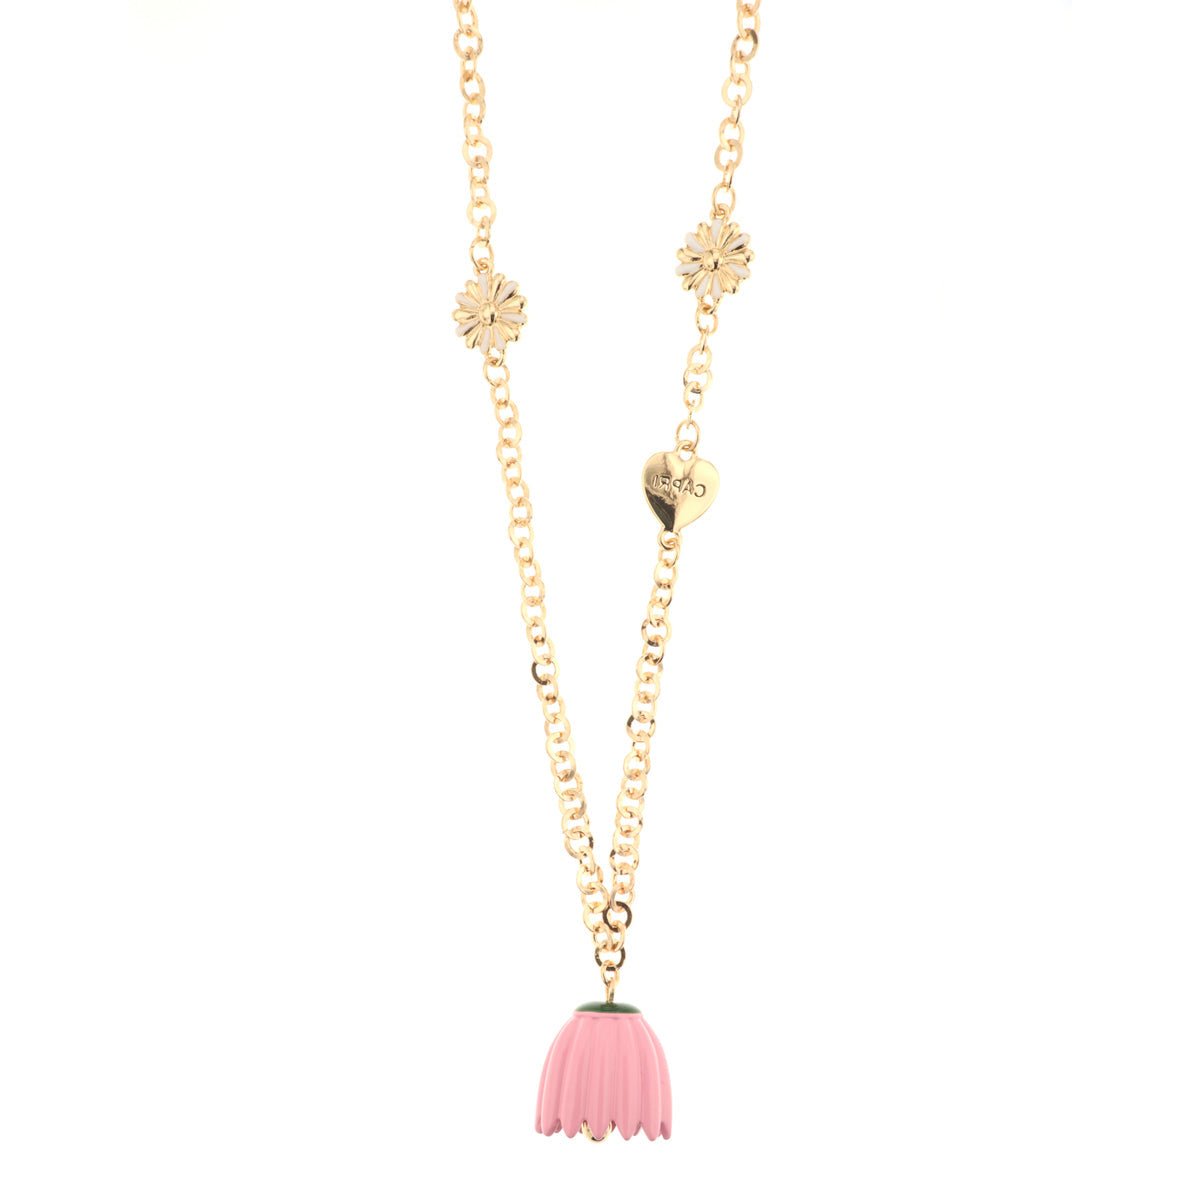 Metal necklace with flower -shaped details, heart and bell pendant in the shape of a pink bell -shaped flower